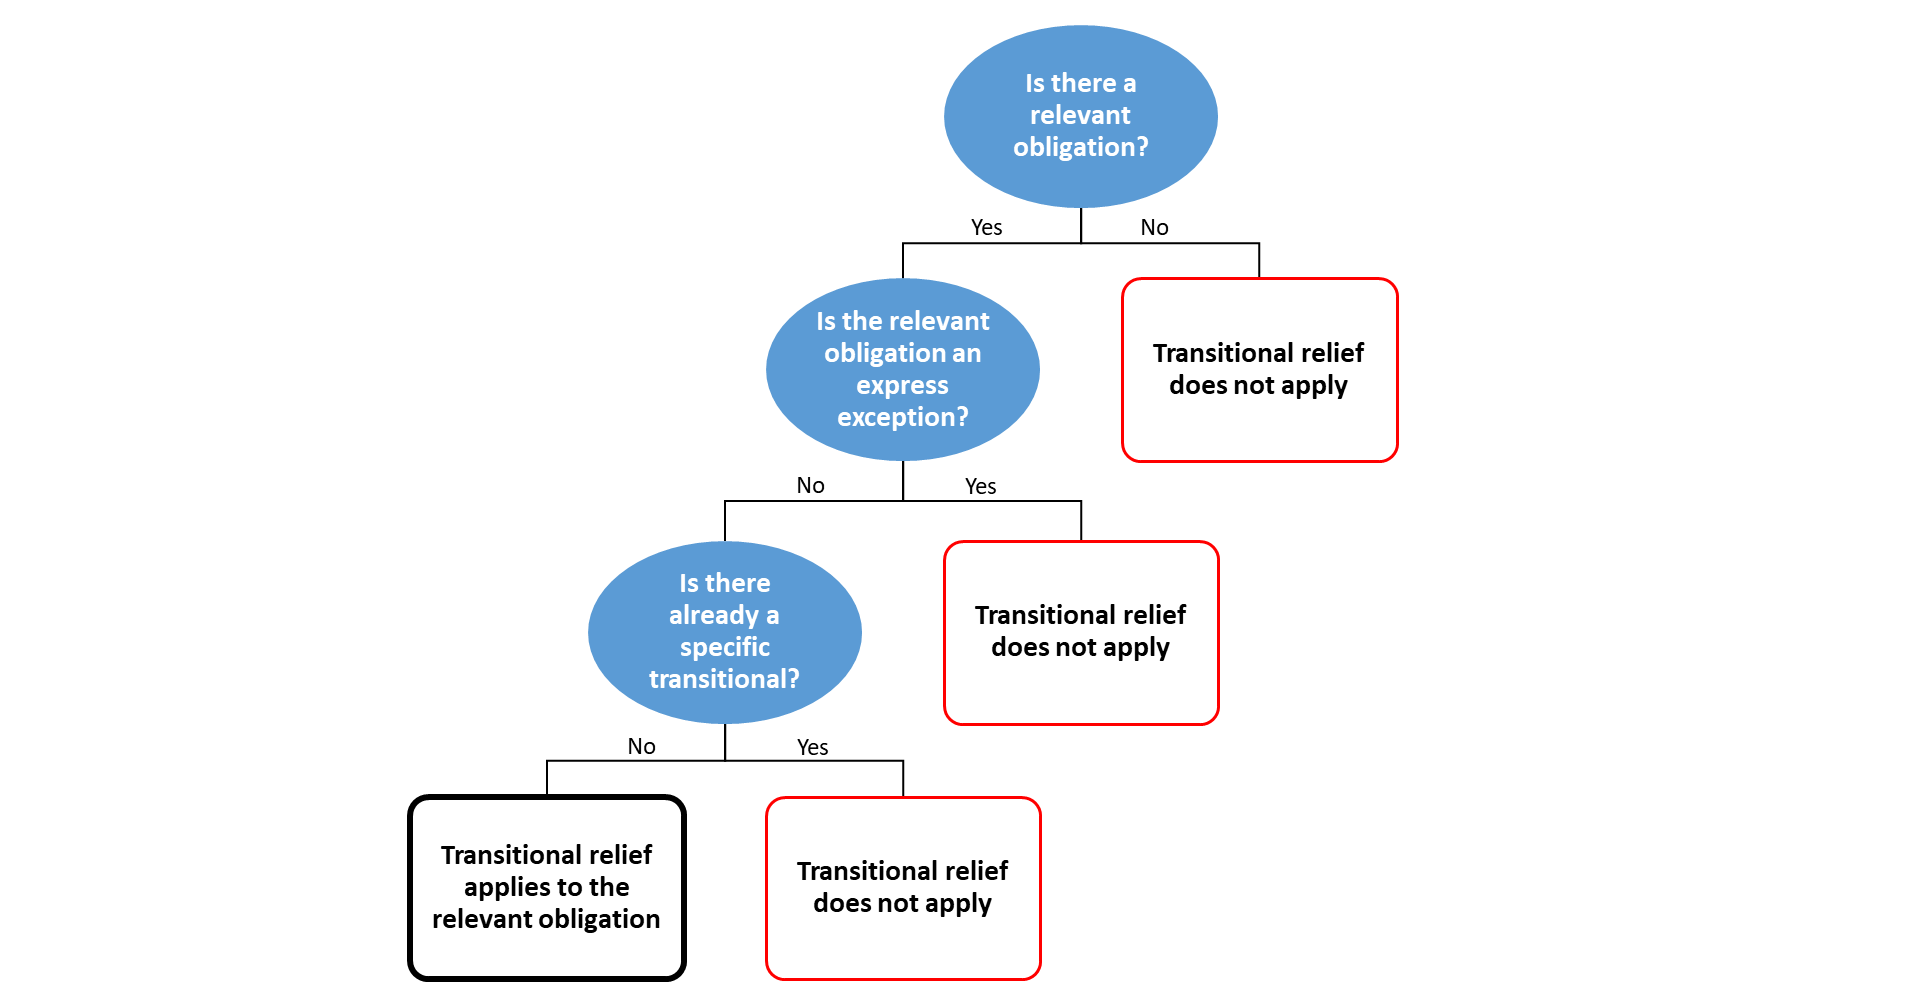 Diagram depicting if transitional relief applies to the relevant obligation or not